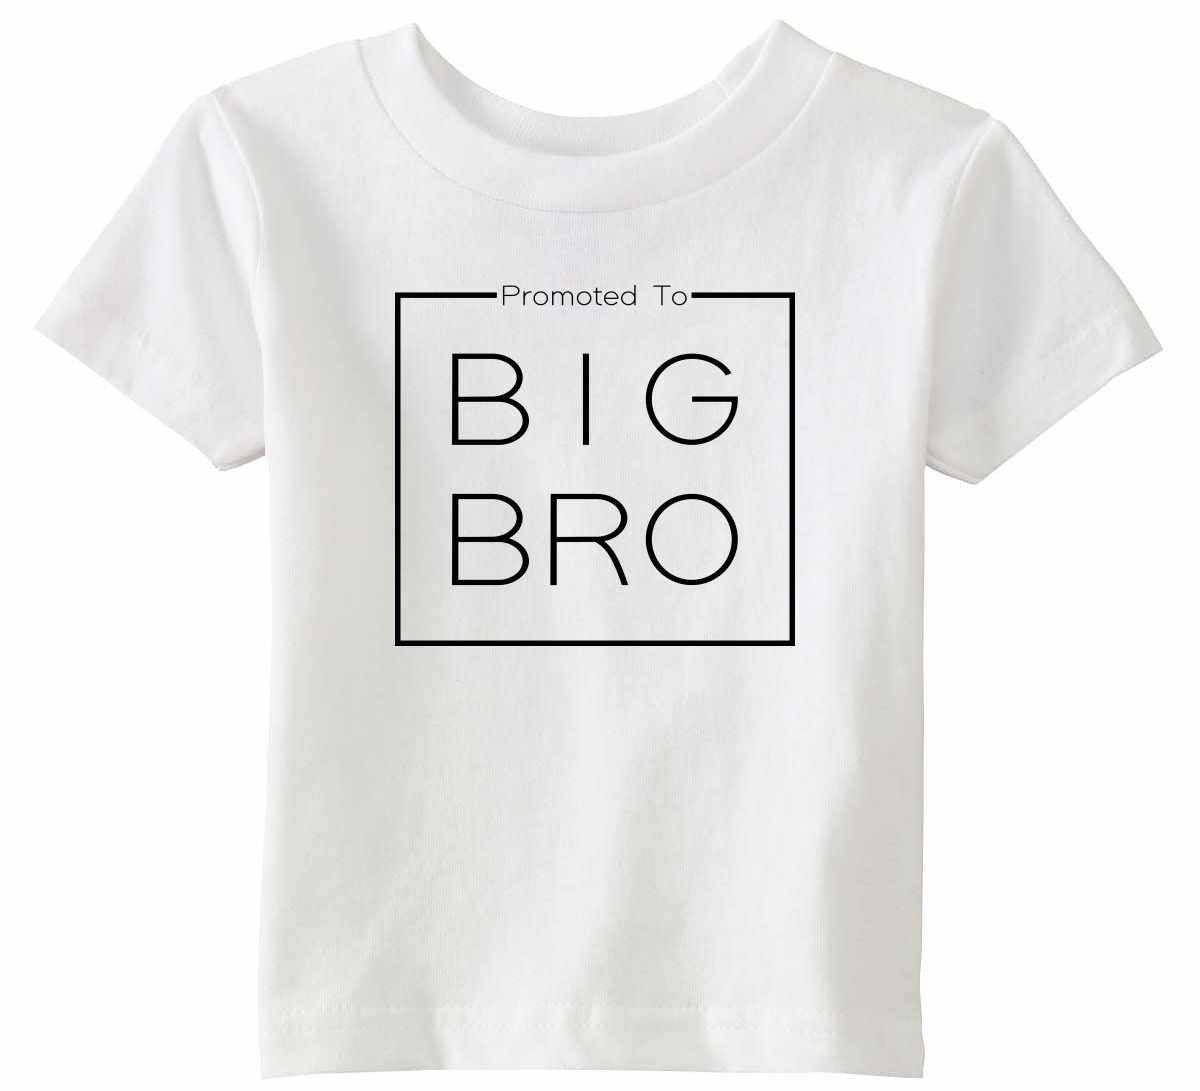 Promoted to Big Bro- Big Brother Box on Infant-Toddler T-Shirt